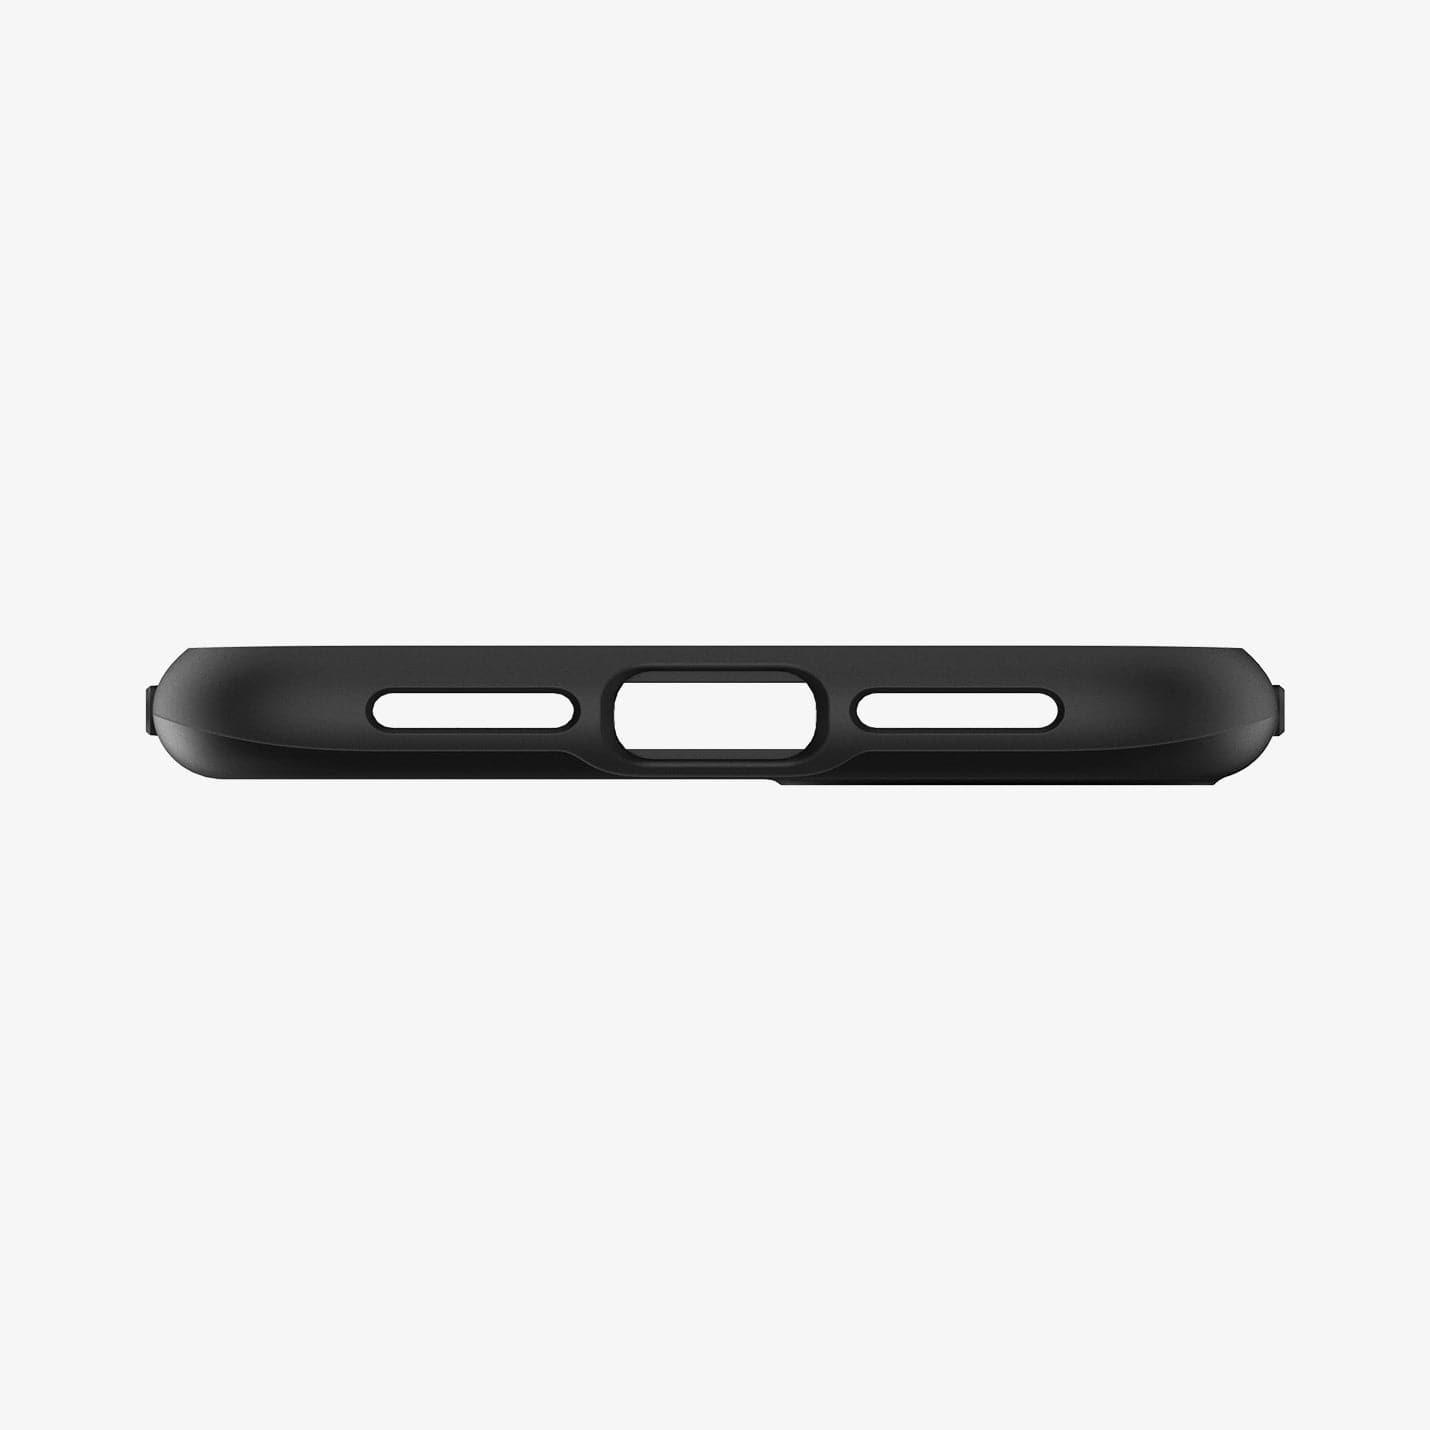 ACS02041 - iPhone 11 Case Thin Fit Pro in black showing the bottom with precise cutouts